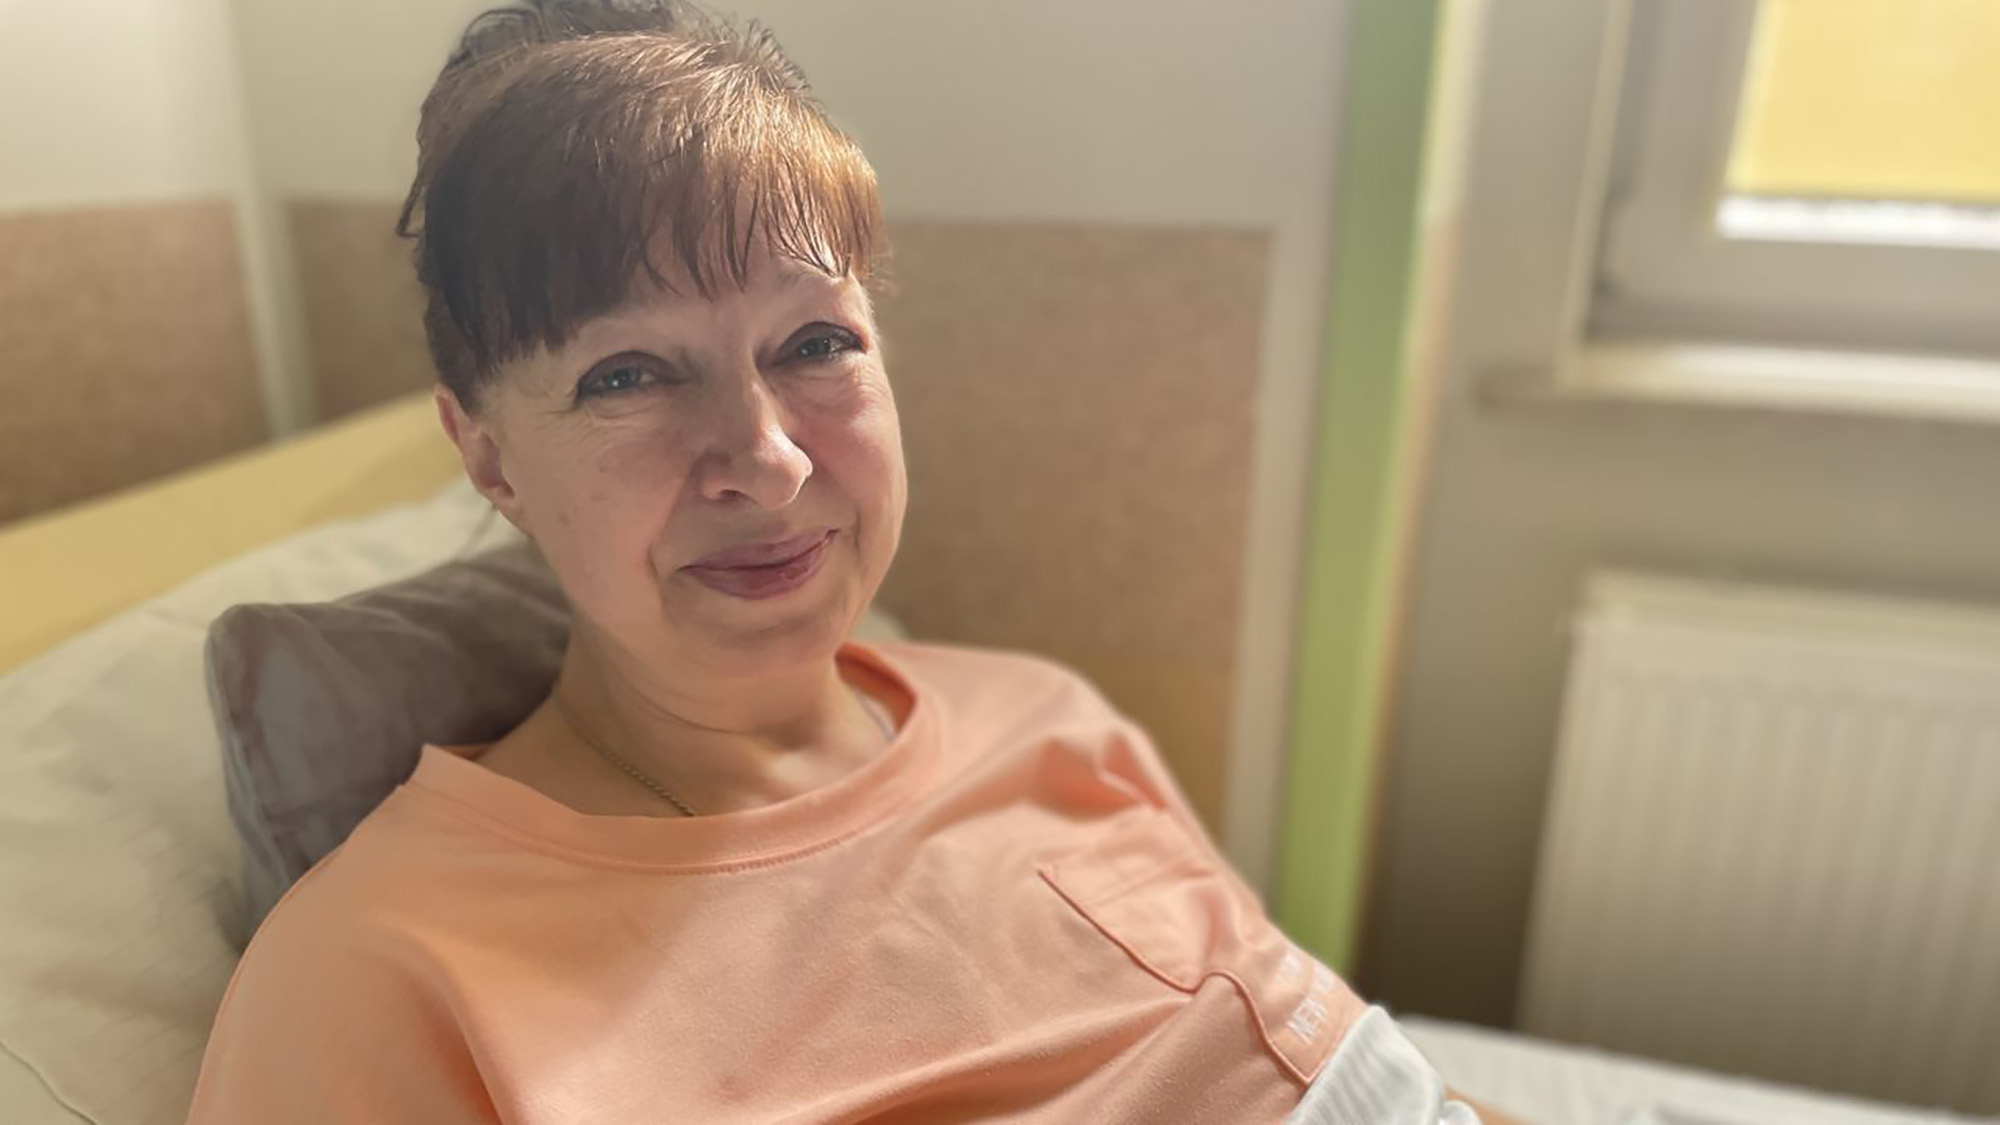 Tatiana Mikhailuk survived an attack in her hometown of Buchad before she developed cervical cancer in Poland.